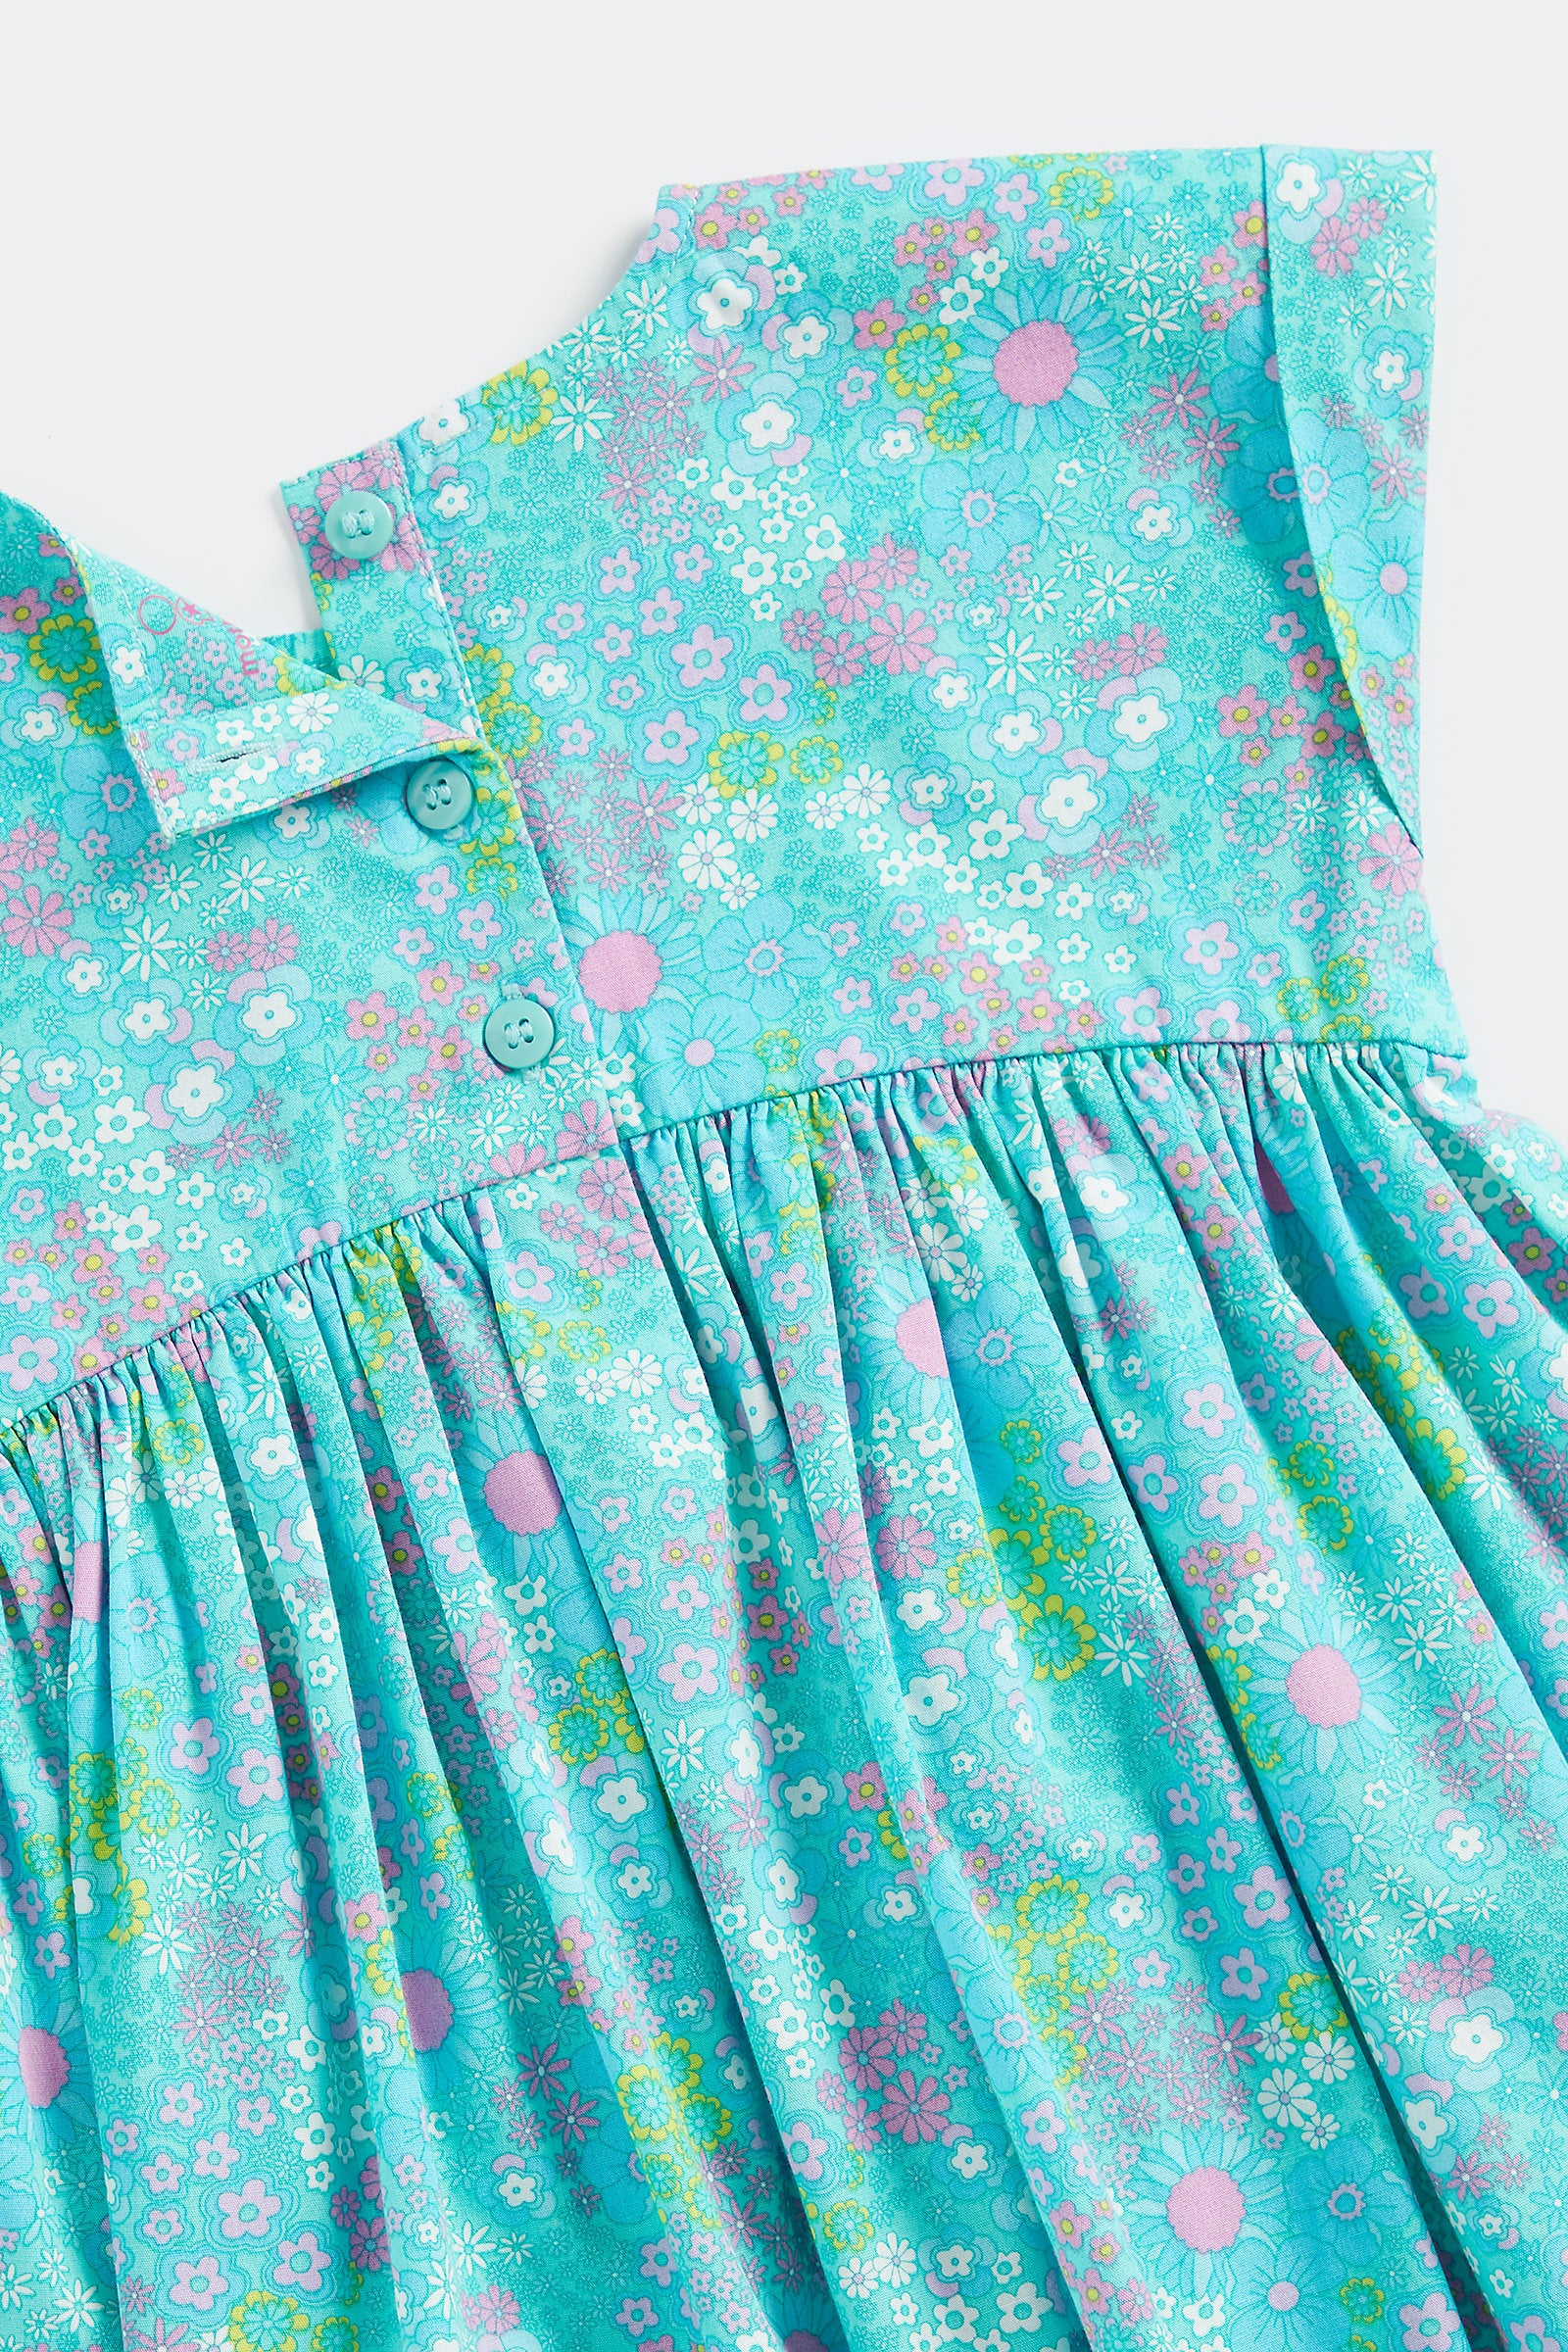 Mothercare Floral Woven Dress